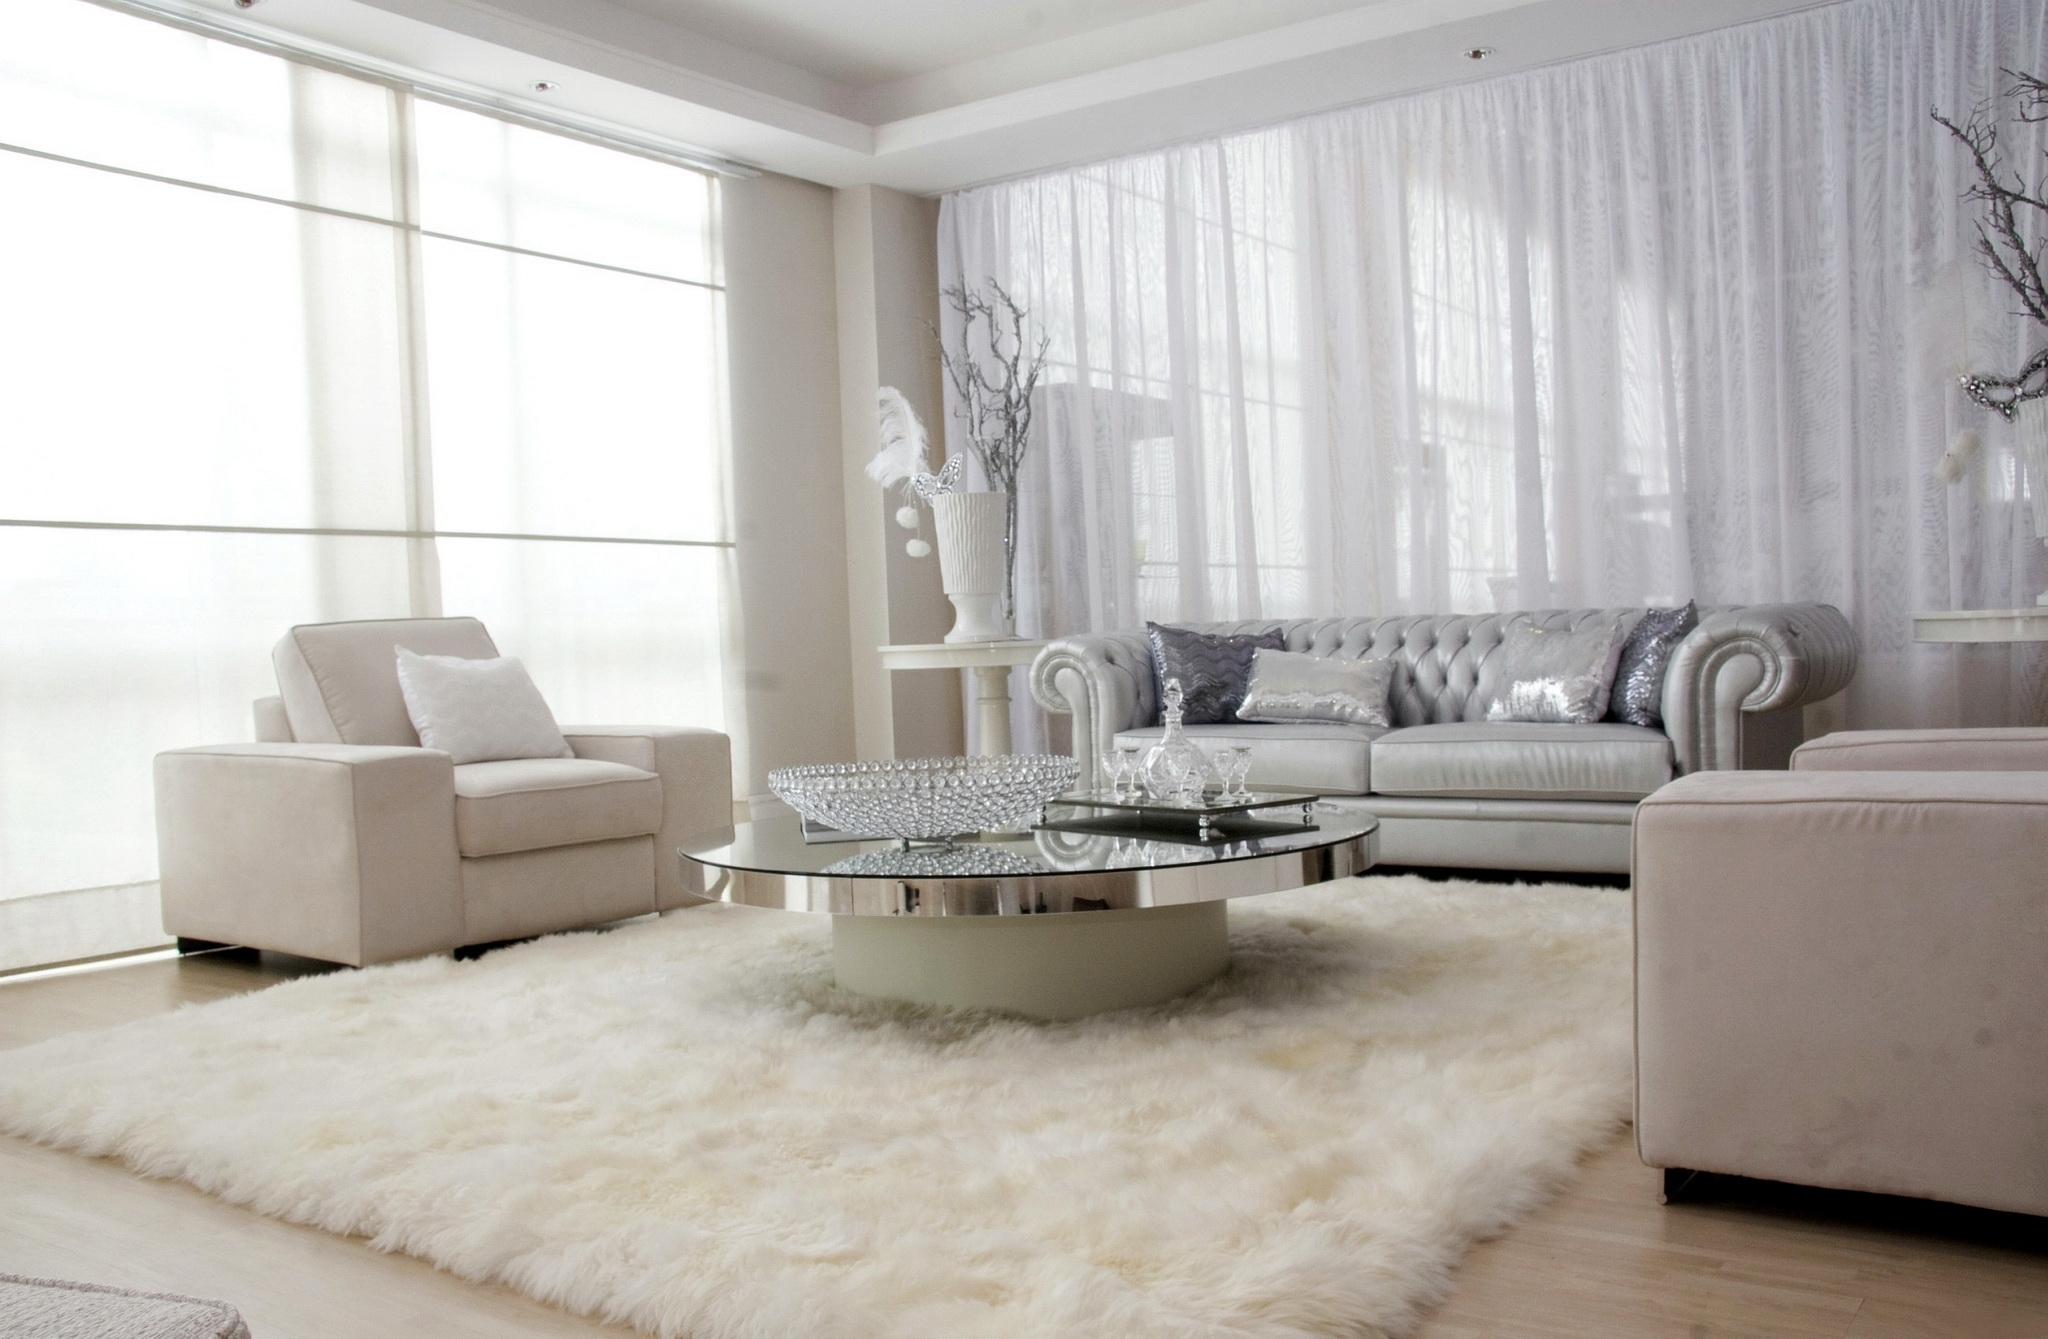 white sofa in the design of the living room